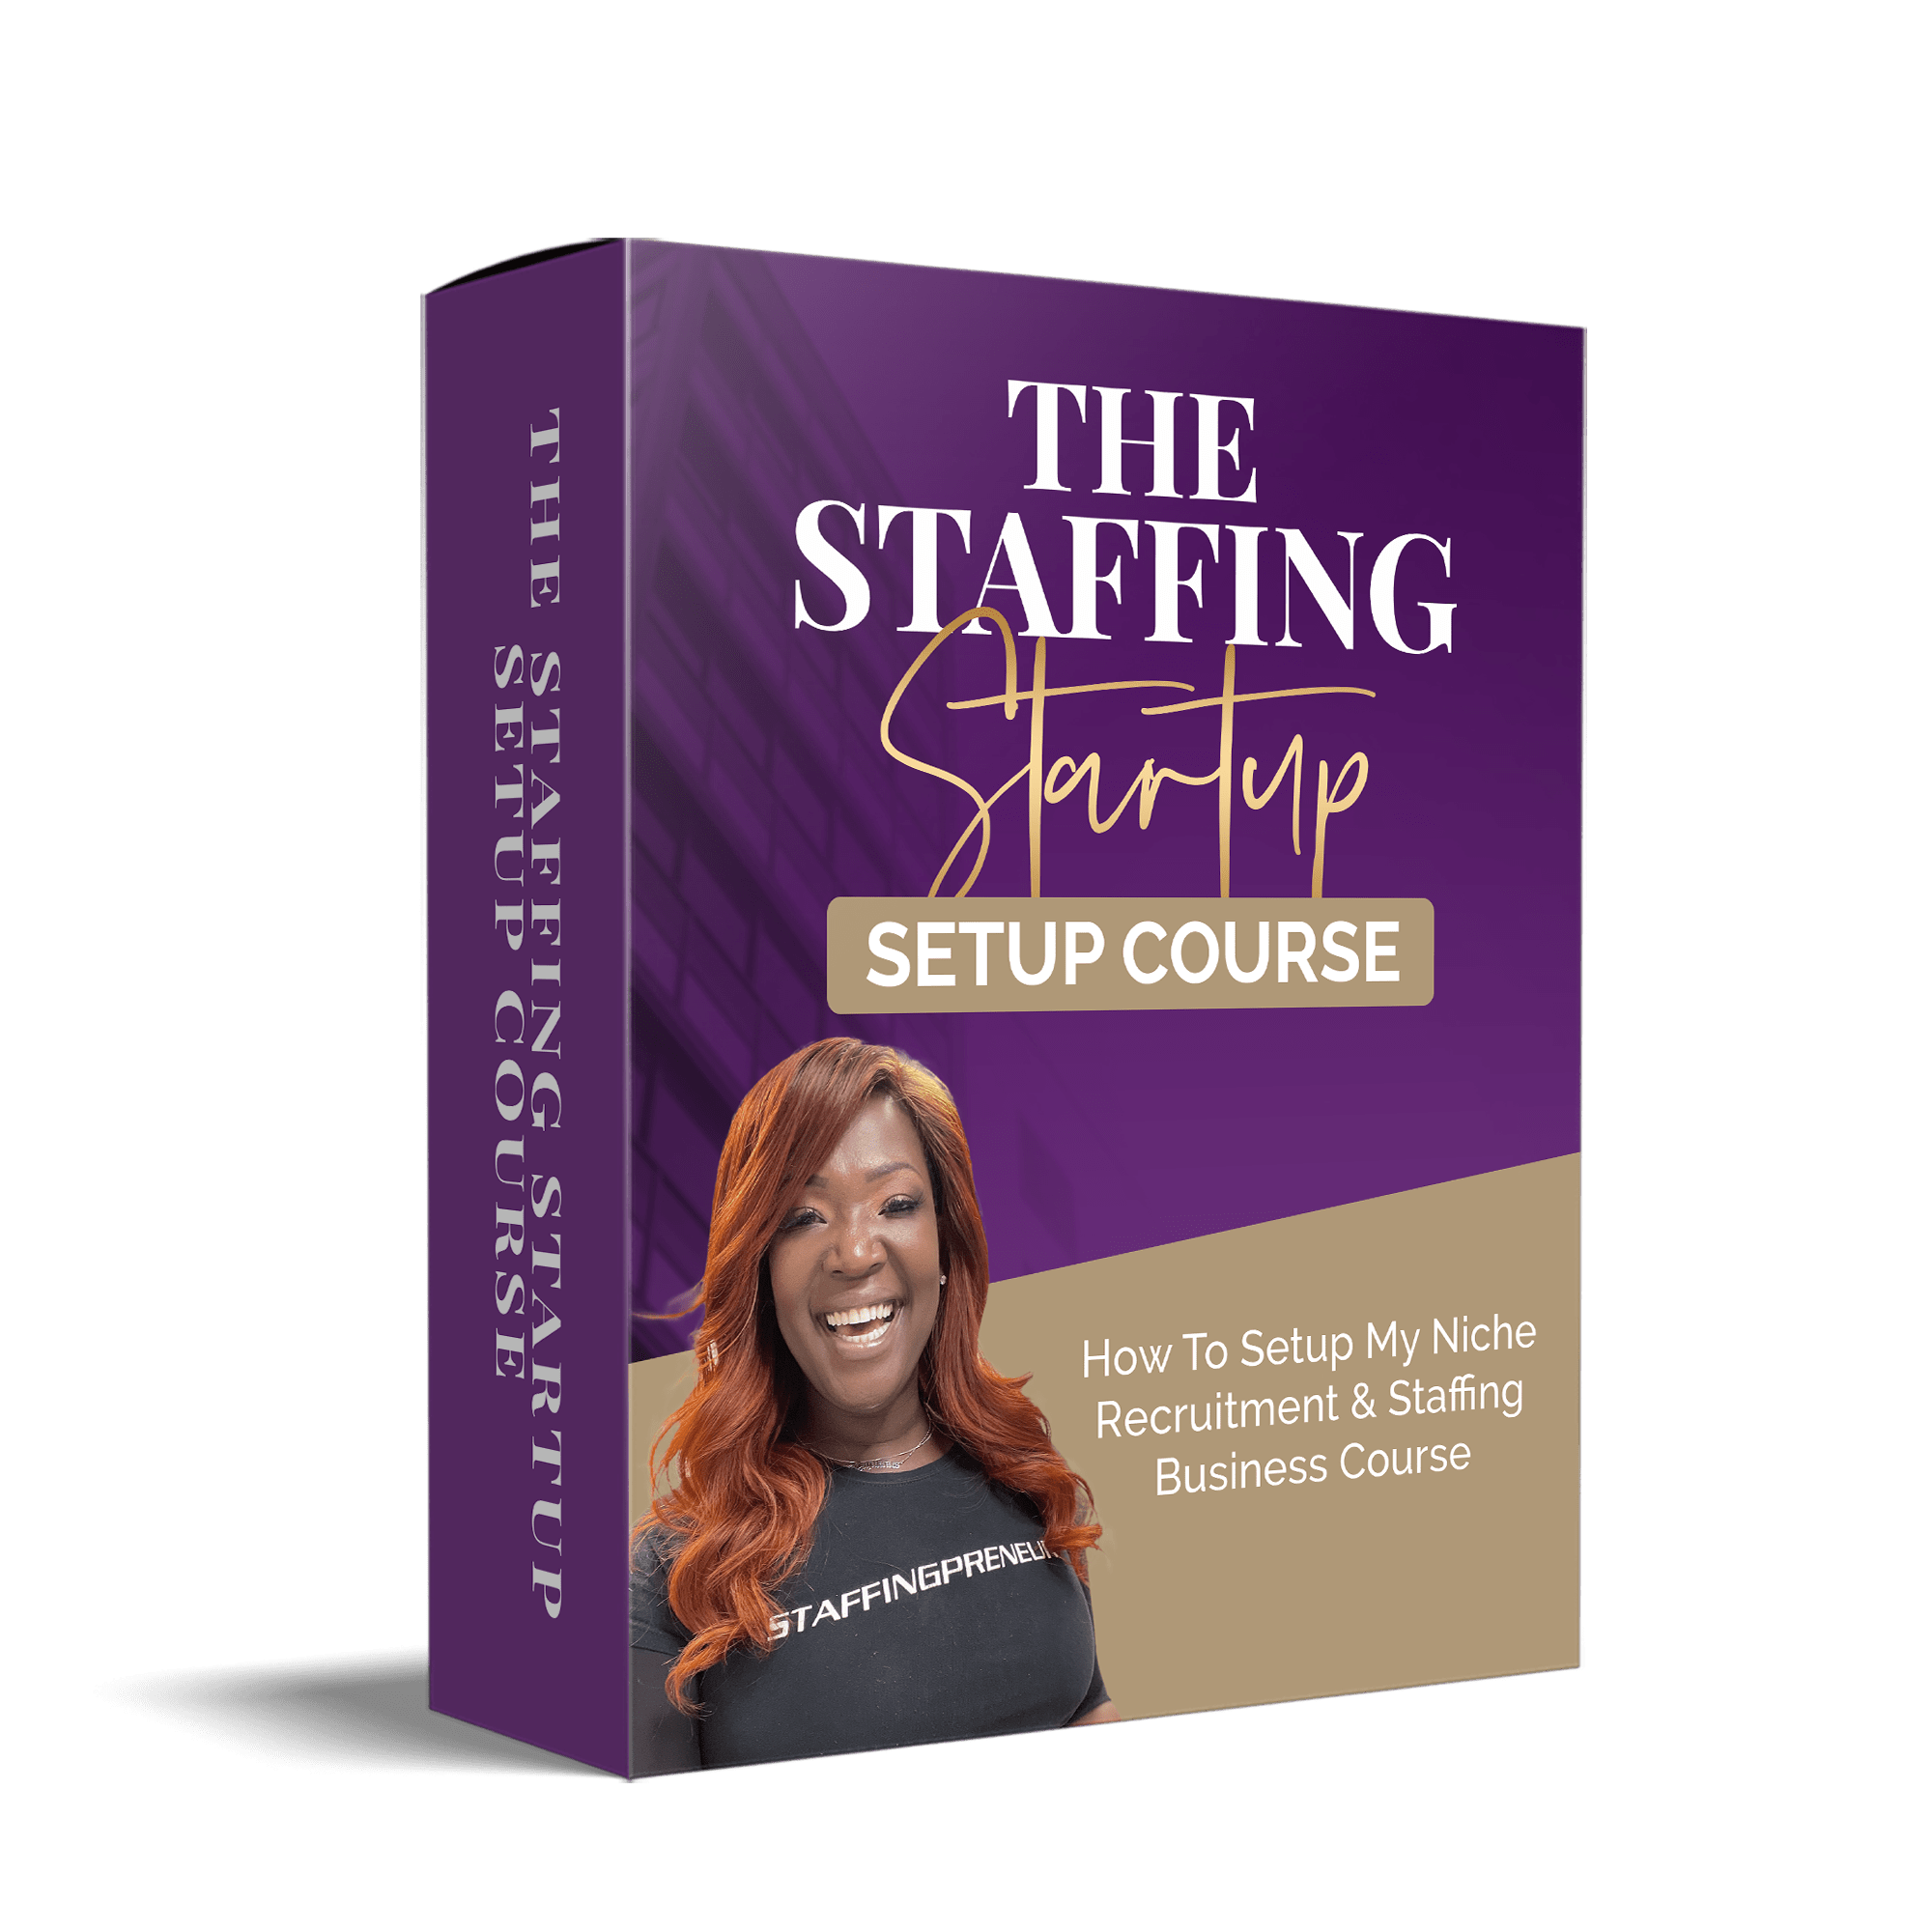 How to Start Staffing Agency - Staffingpreneurs Academy Setup Course - How to Set Up a Staffing Agency